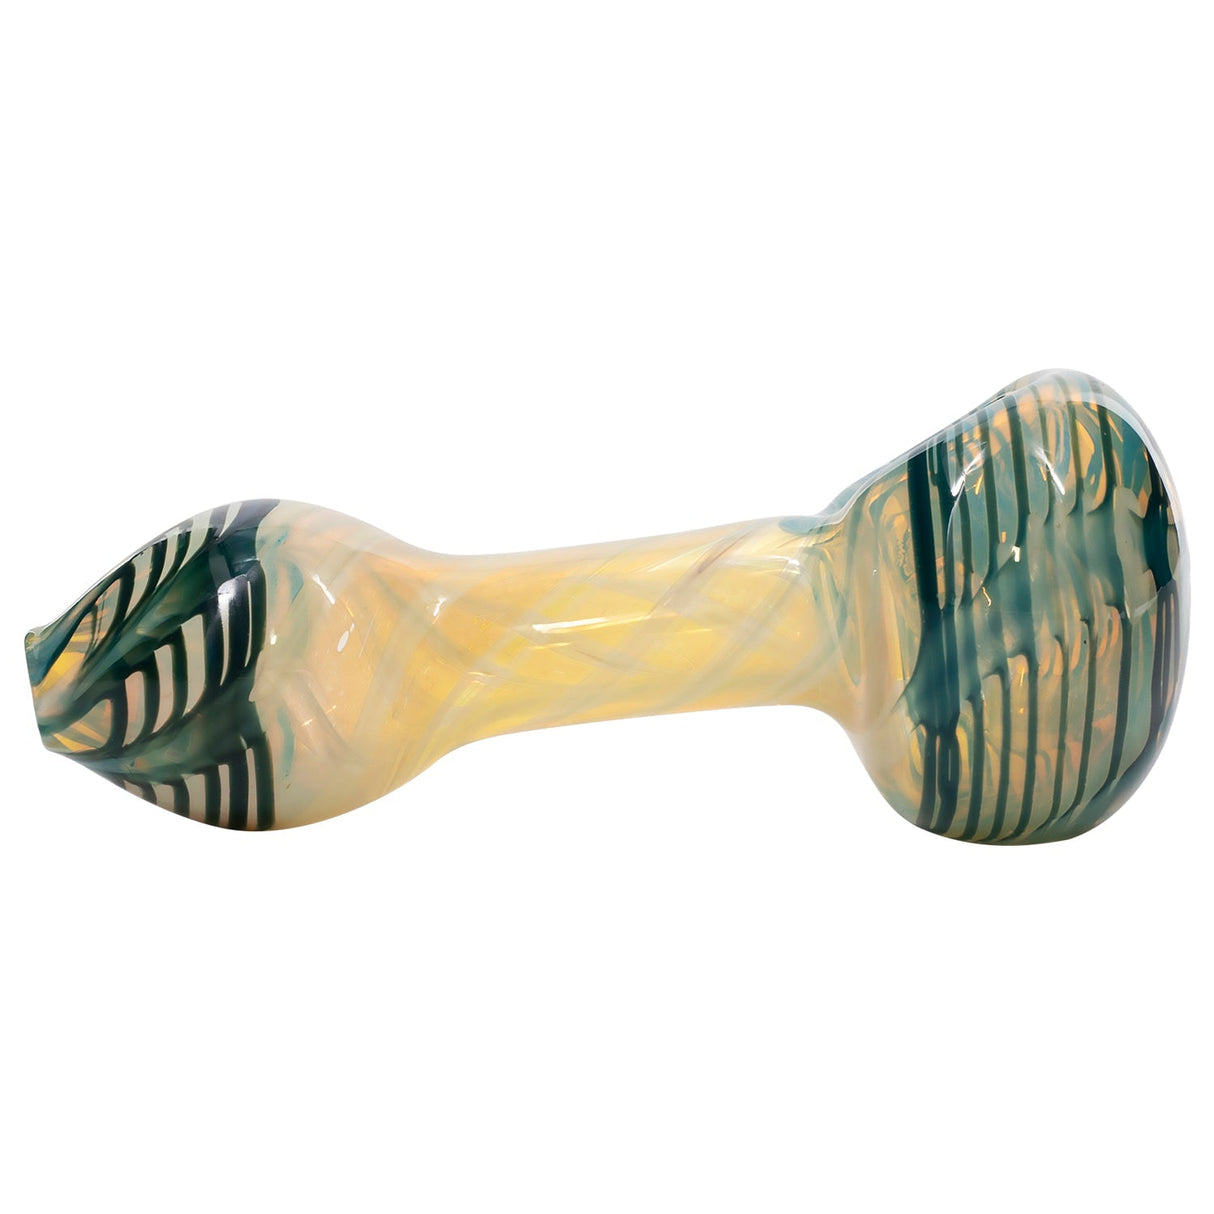 LA Pipes Twisty Cane Spoon Glass Pipe in Assorted Colors, Side View on White Background